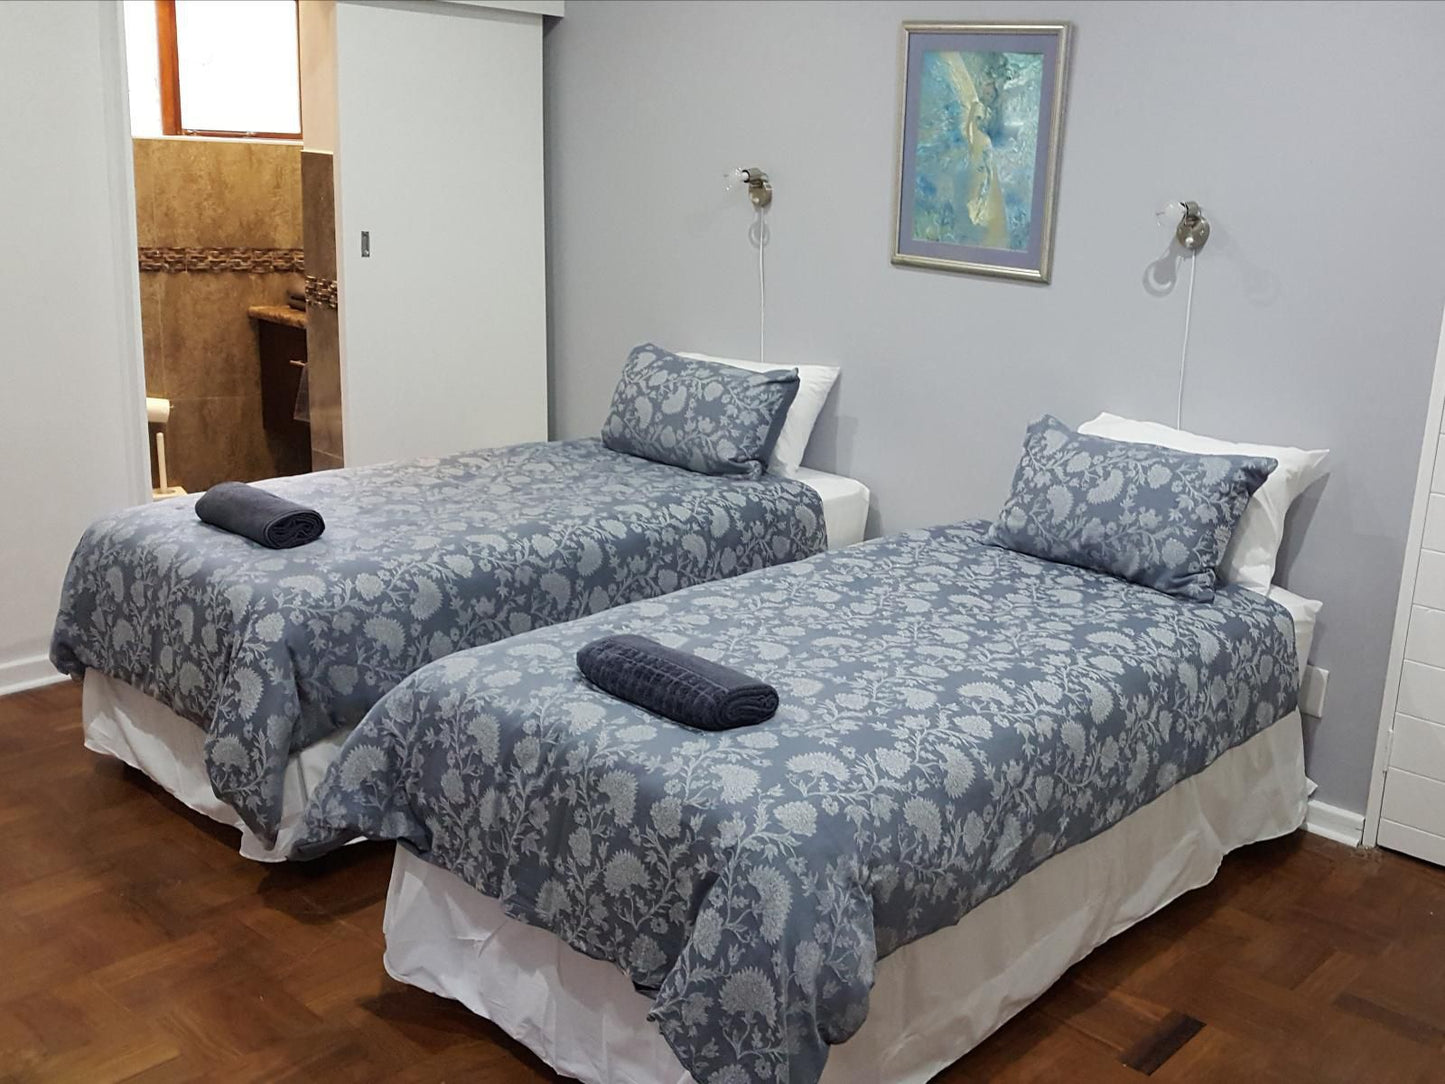 7 On Disa Self Catering Accommodation Milnerton Cape Town Western Cape South Africa Bedroom